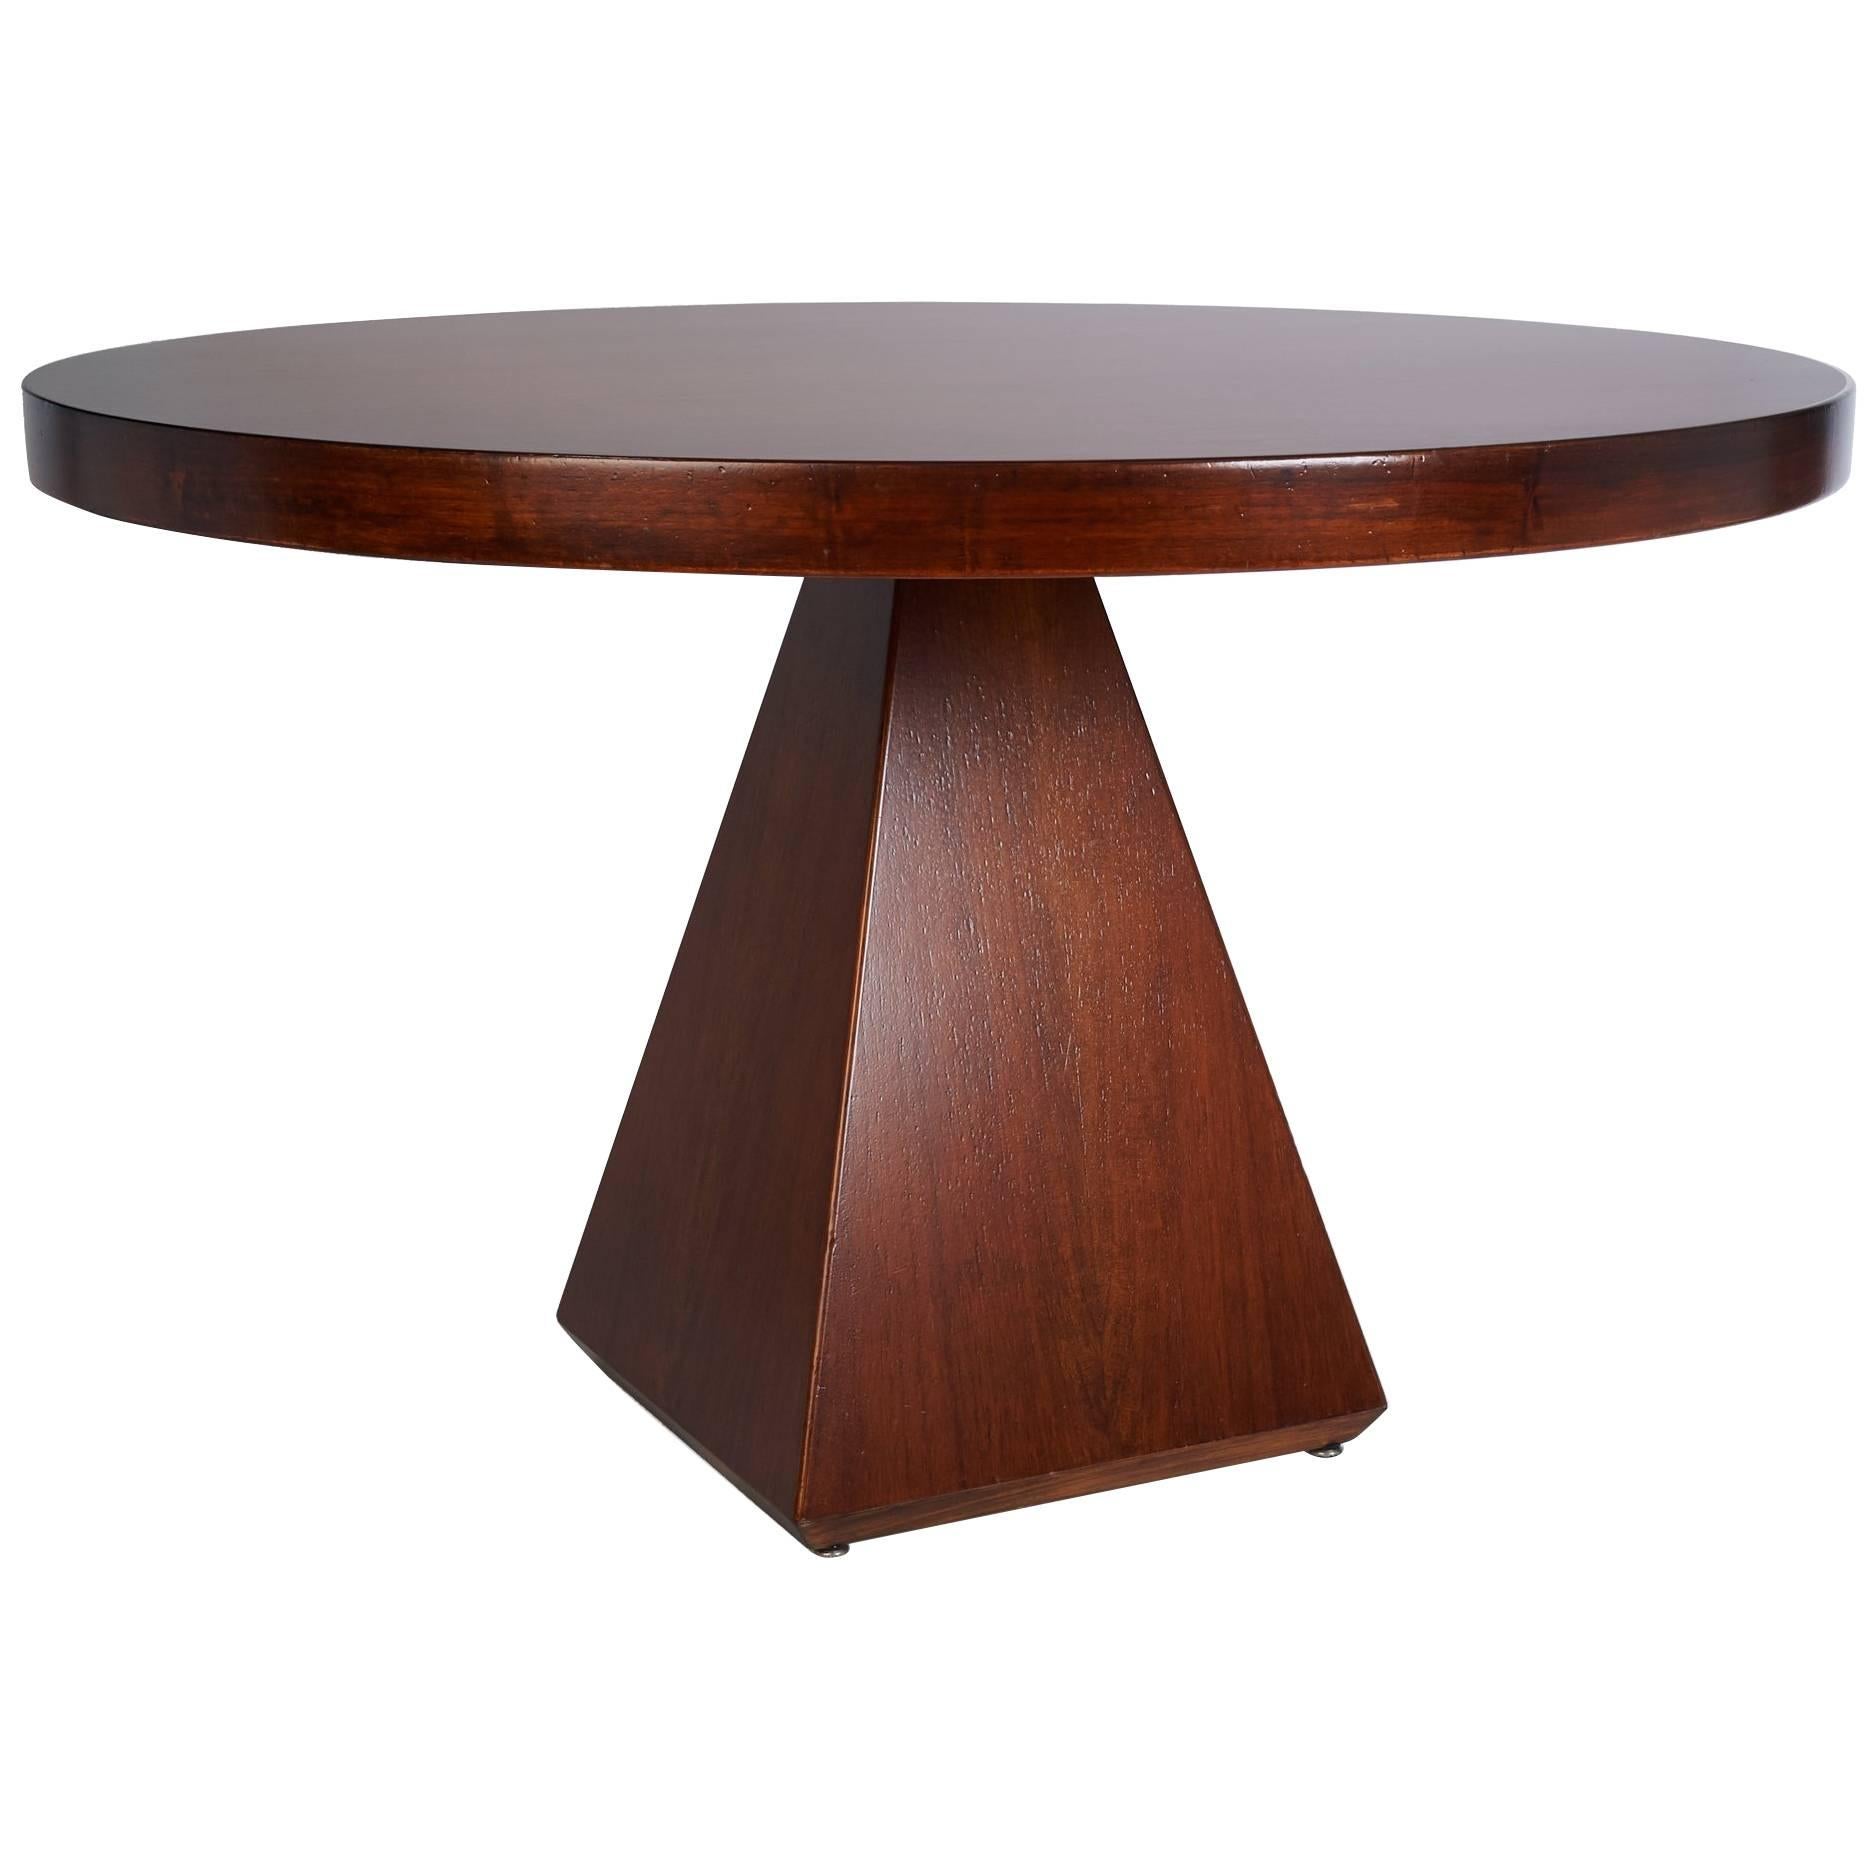 Vittorio Introini: Geometric Walnut Dining Table with Round Top, Italy 1960's